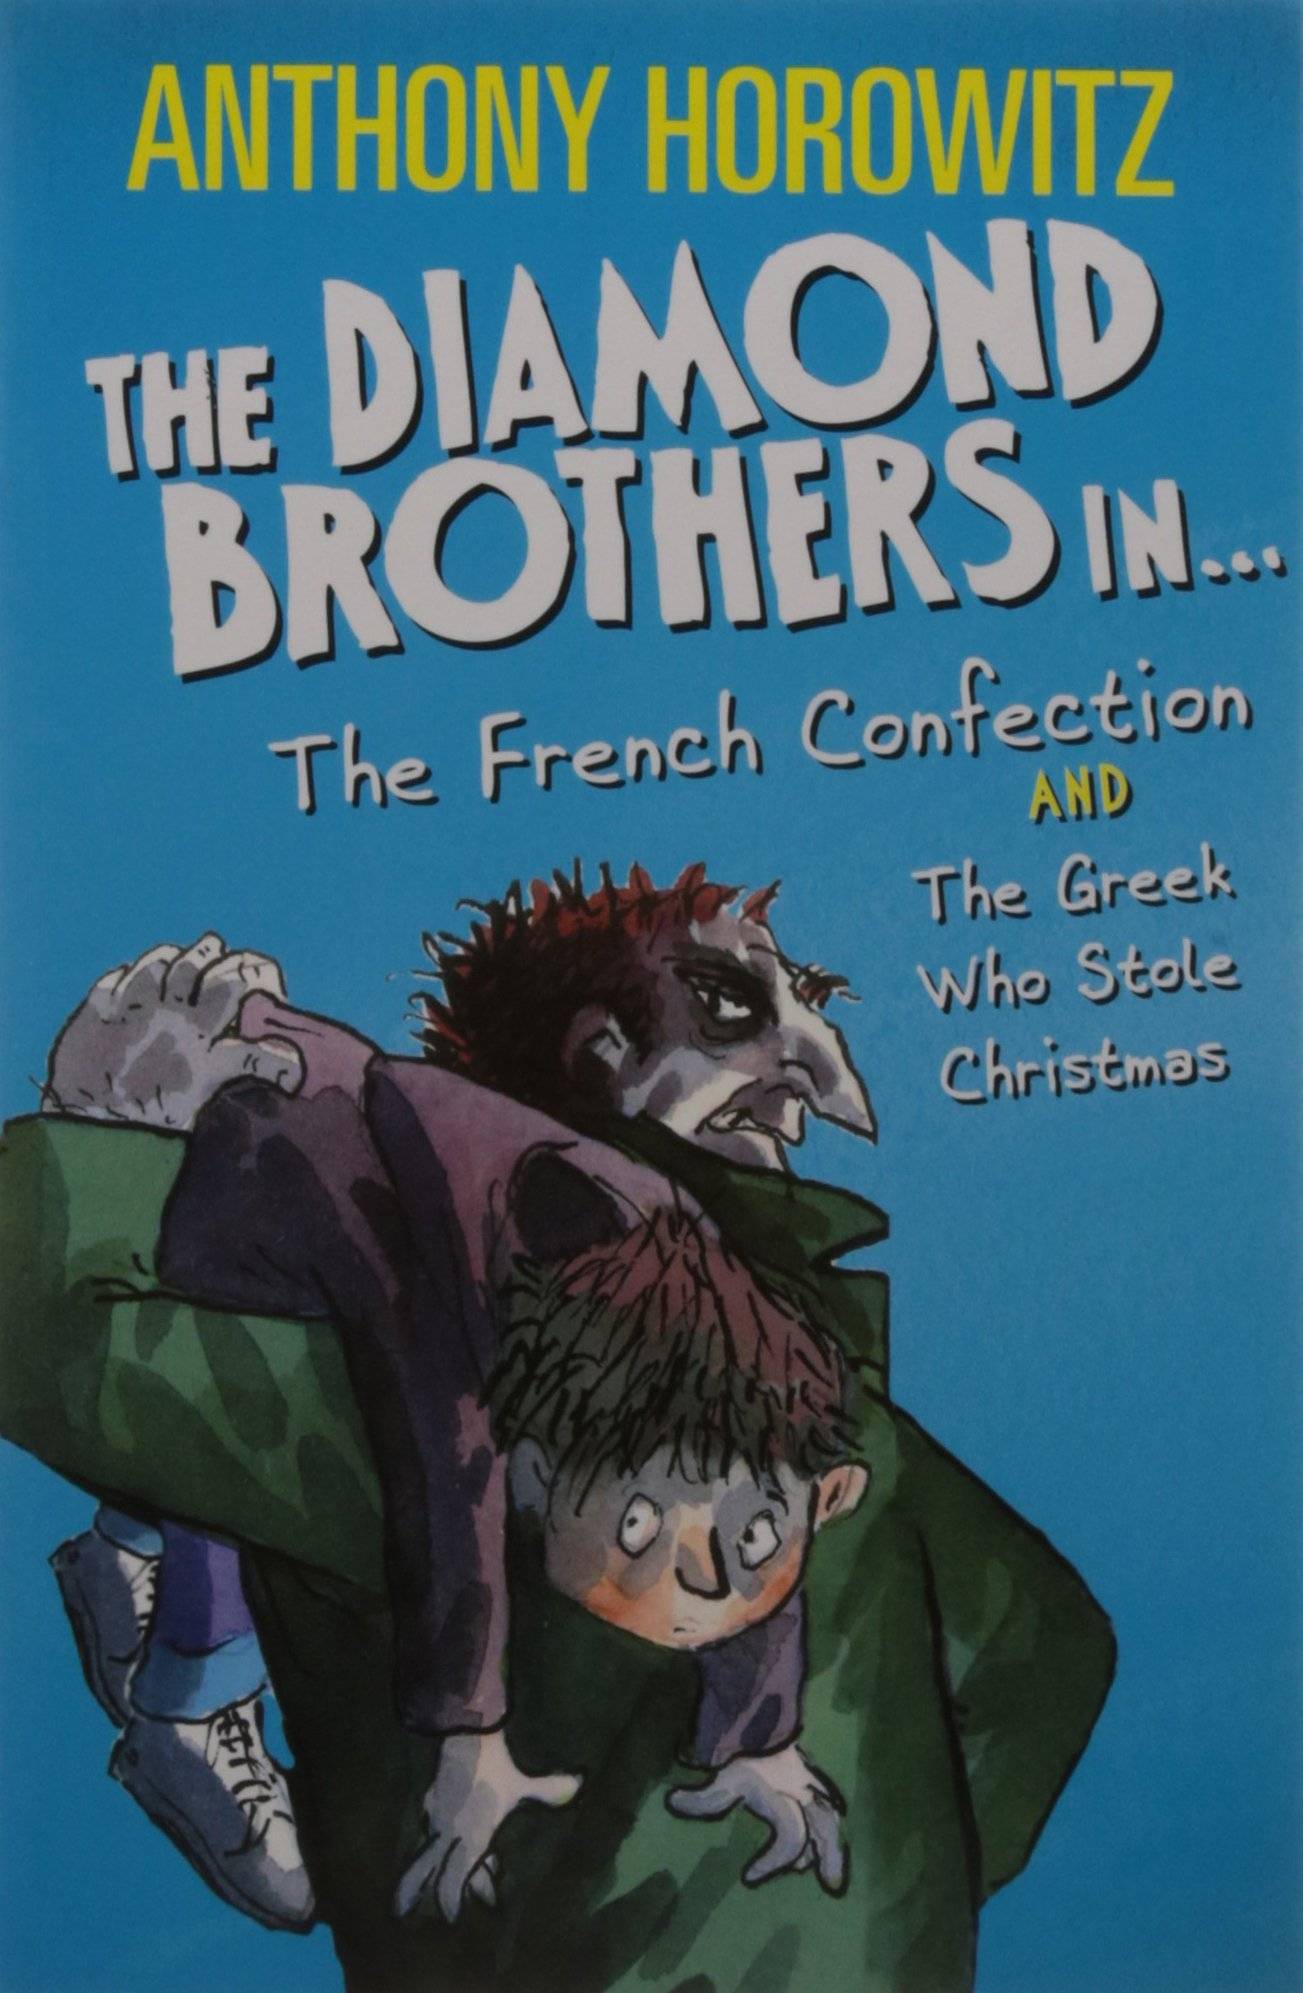 IMG : The Diamond Brothers in The French Confection